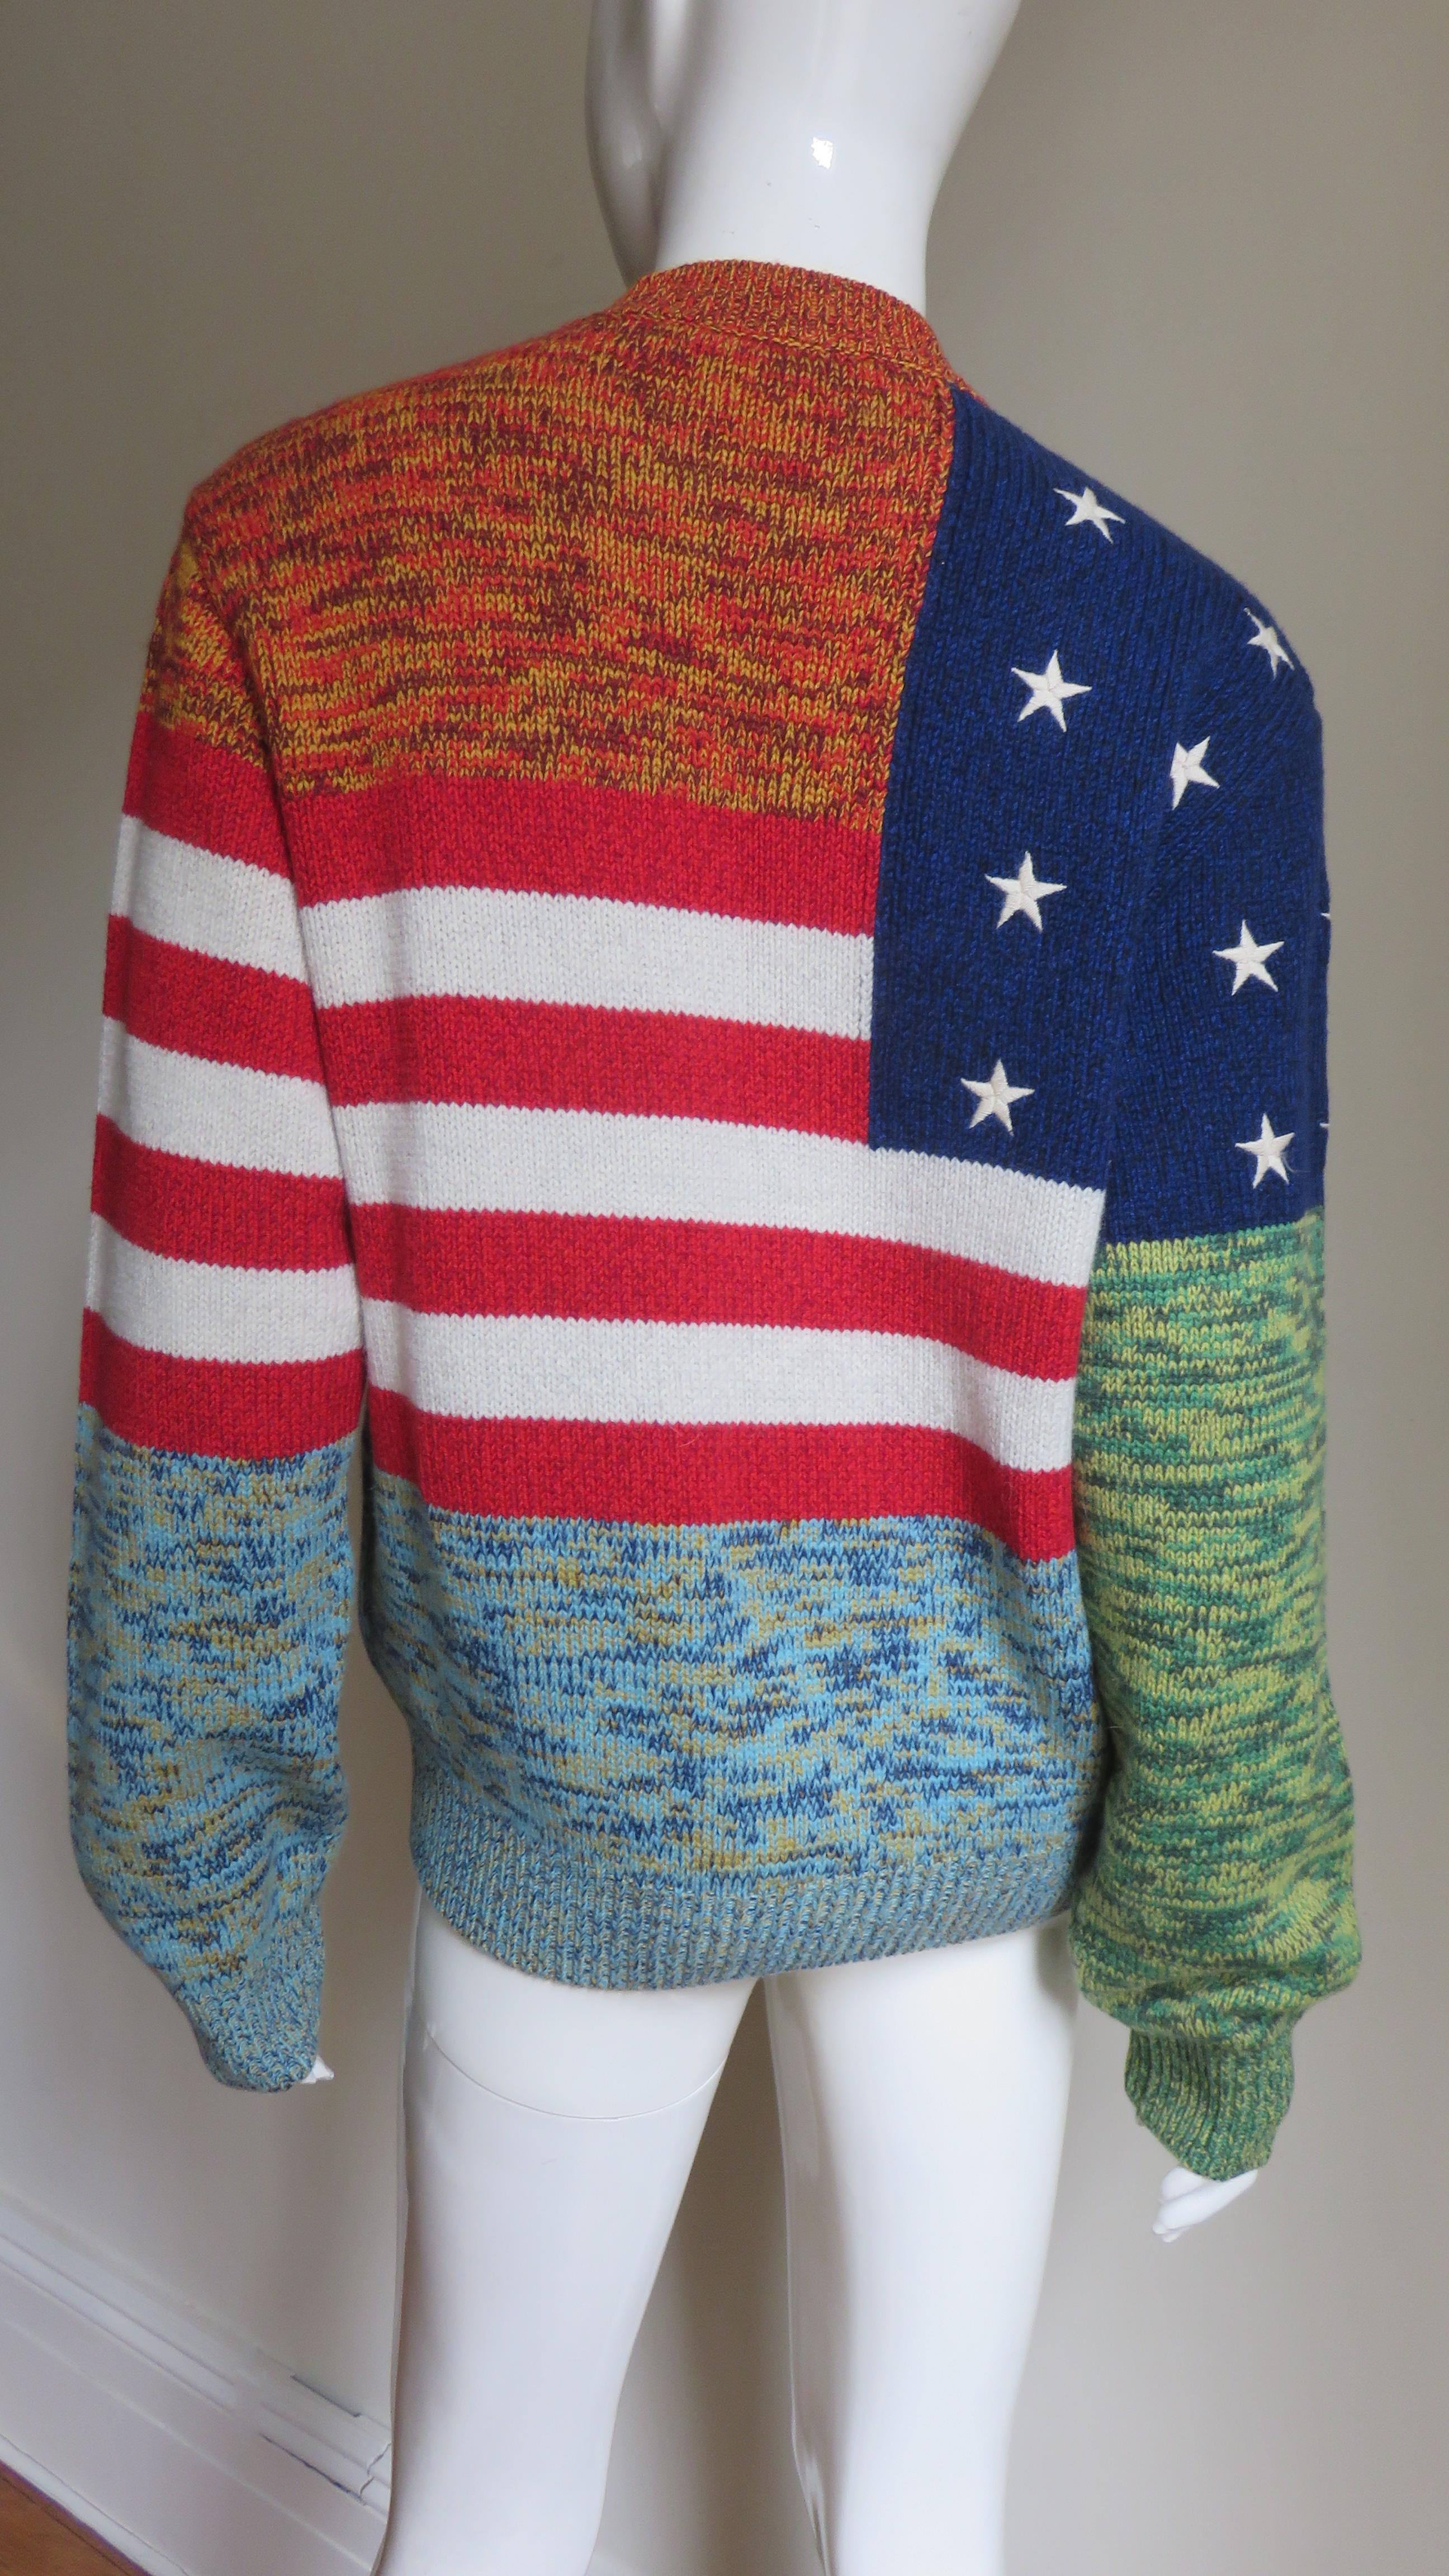 Gianni Versace New Vintage Cashmere Colorblock American Flag Sweater For Sale 3